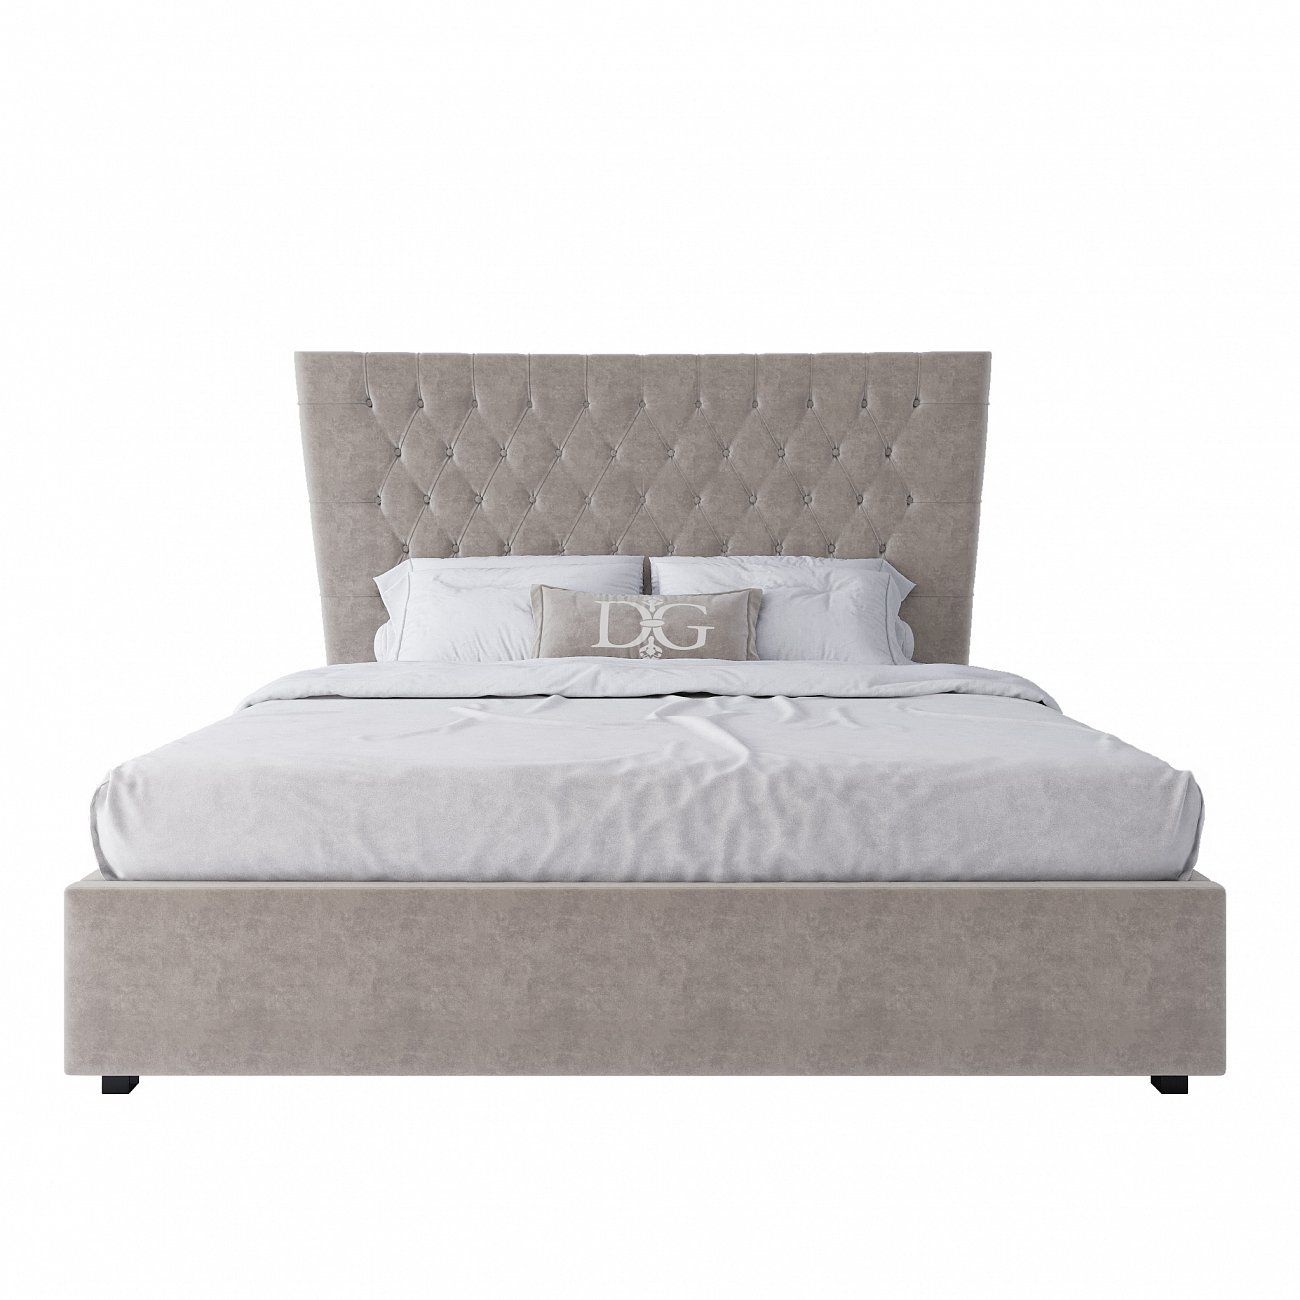 Double bed with upholstered headboard 180x200 cm light beige QuickSand